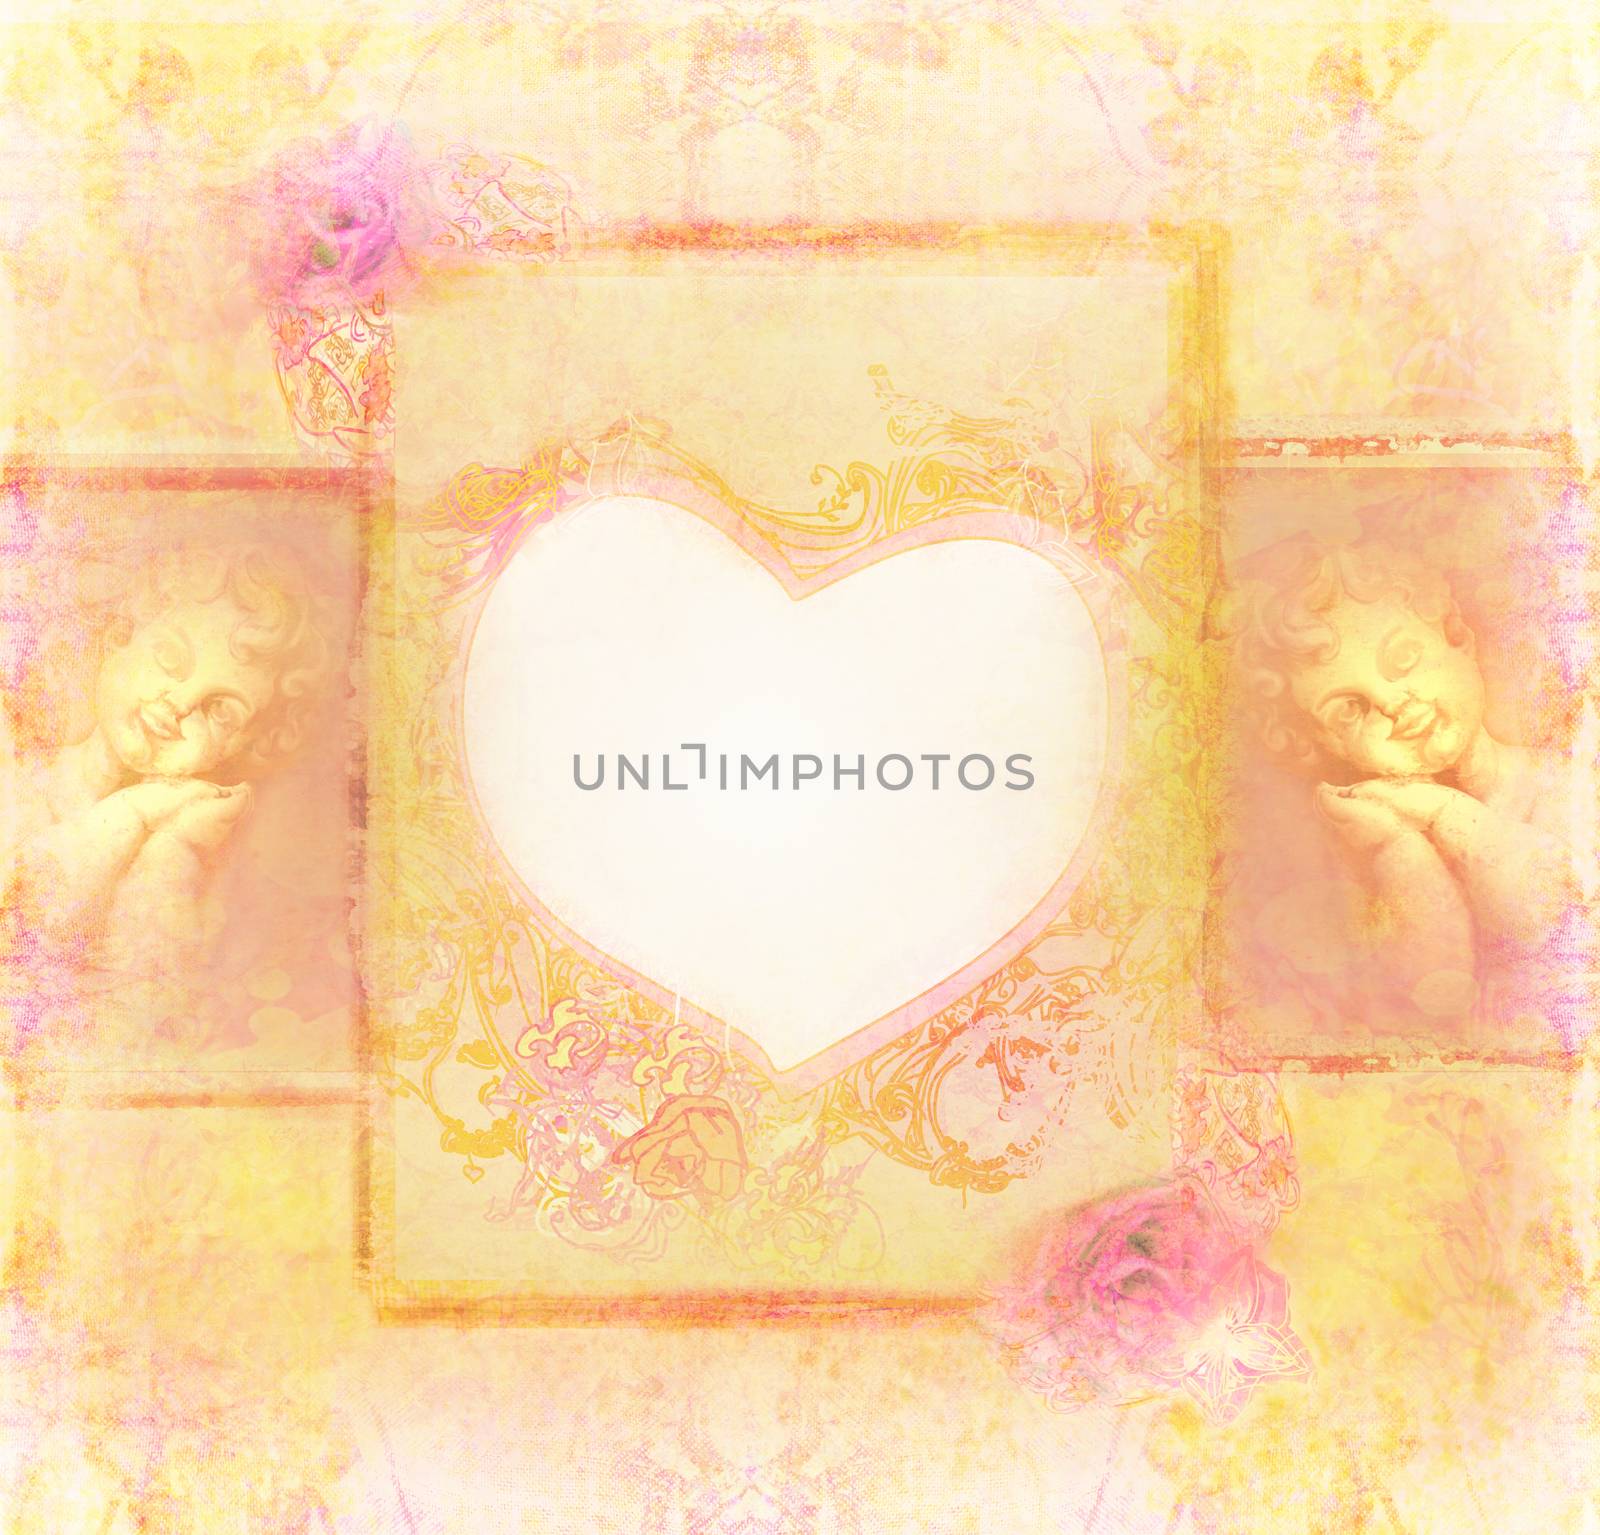 Vintage background with frame and angels by JackyBrown